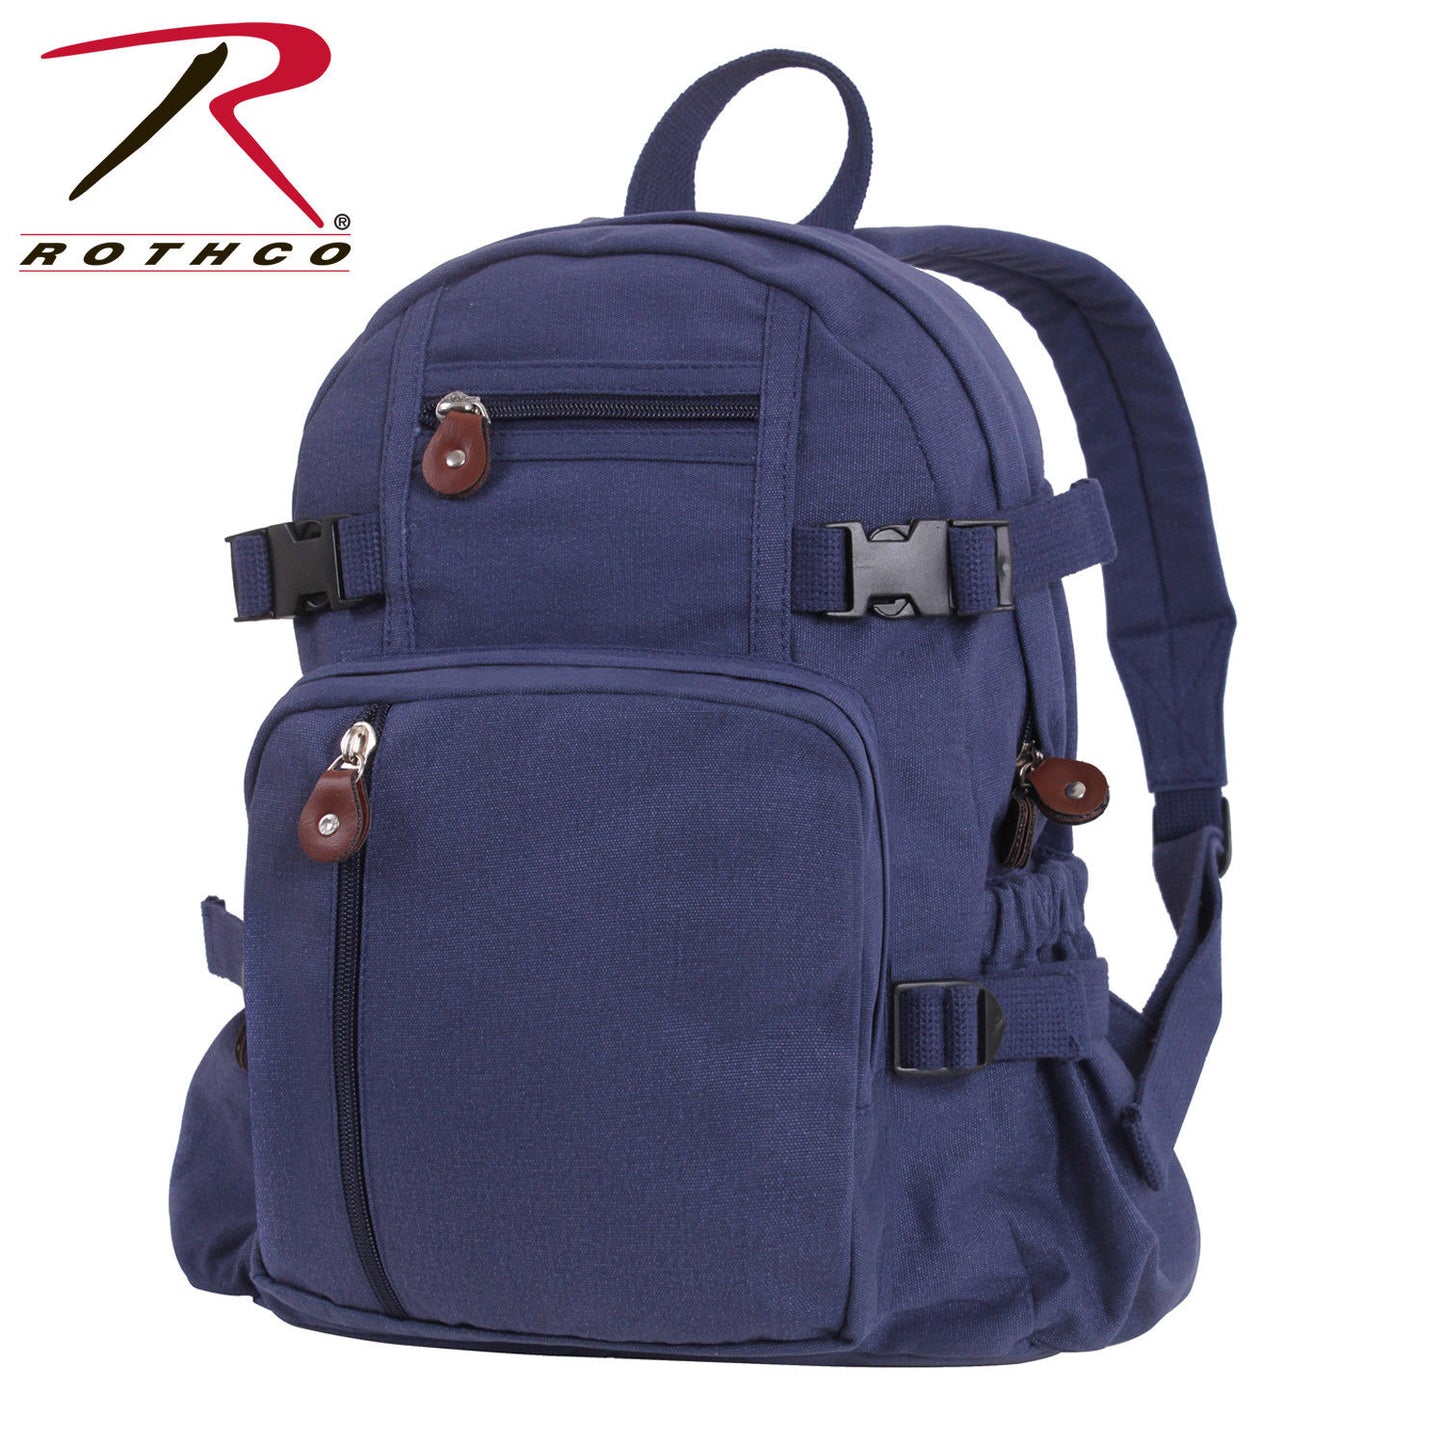 Rothco Vintage Canvas Compact Backpack - Navy Blue Canvas School Bag Book Bag